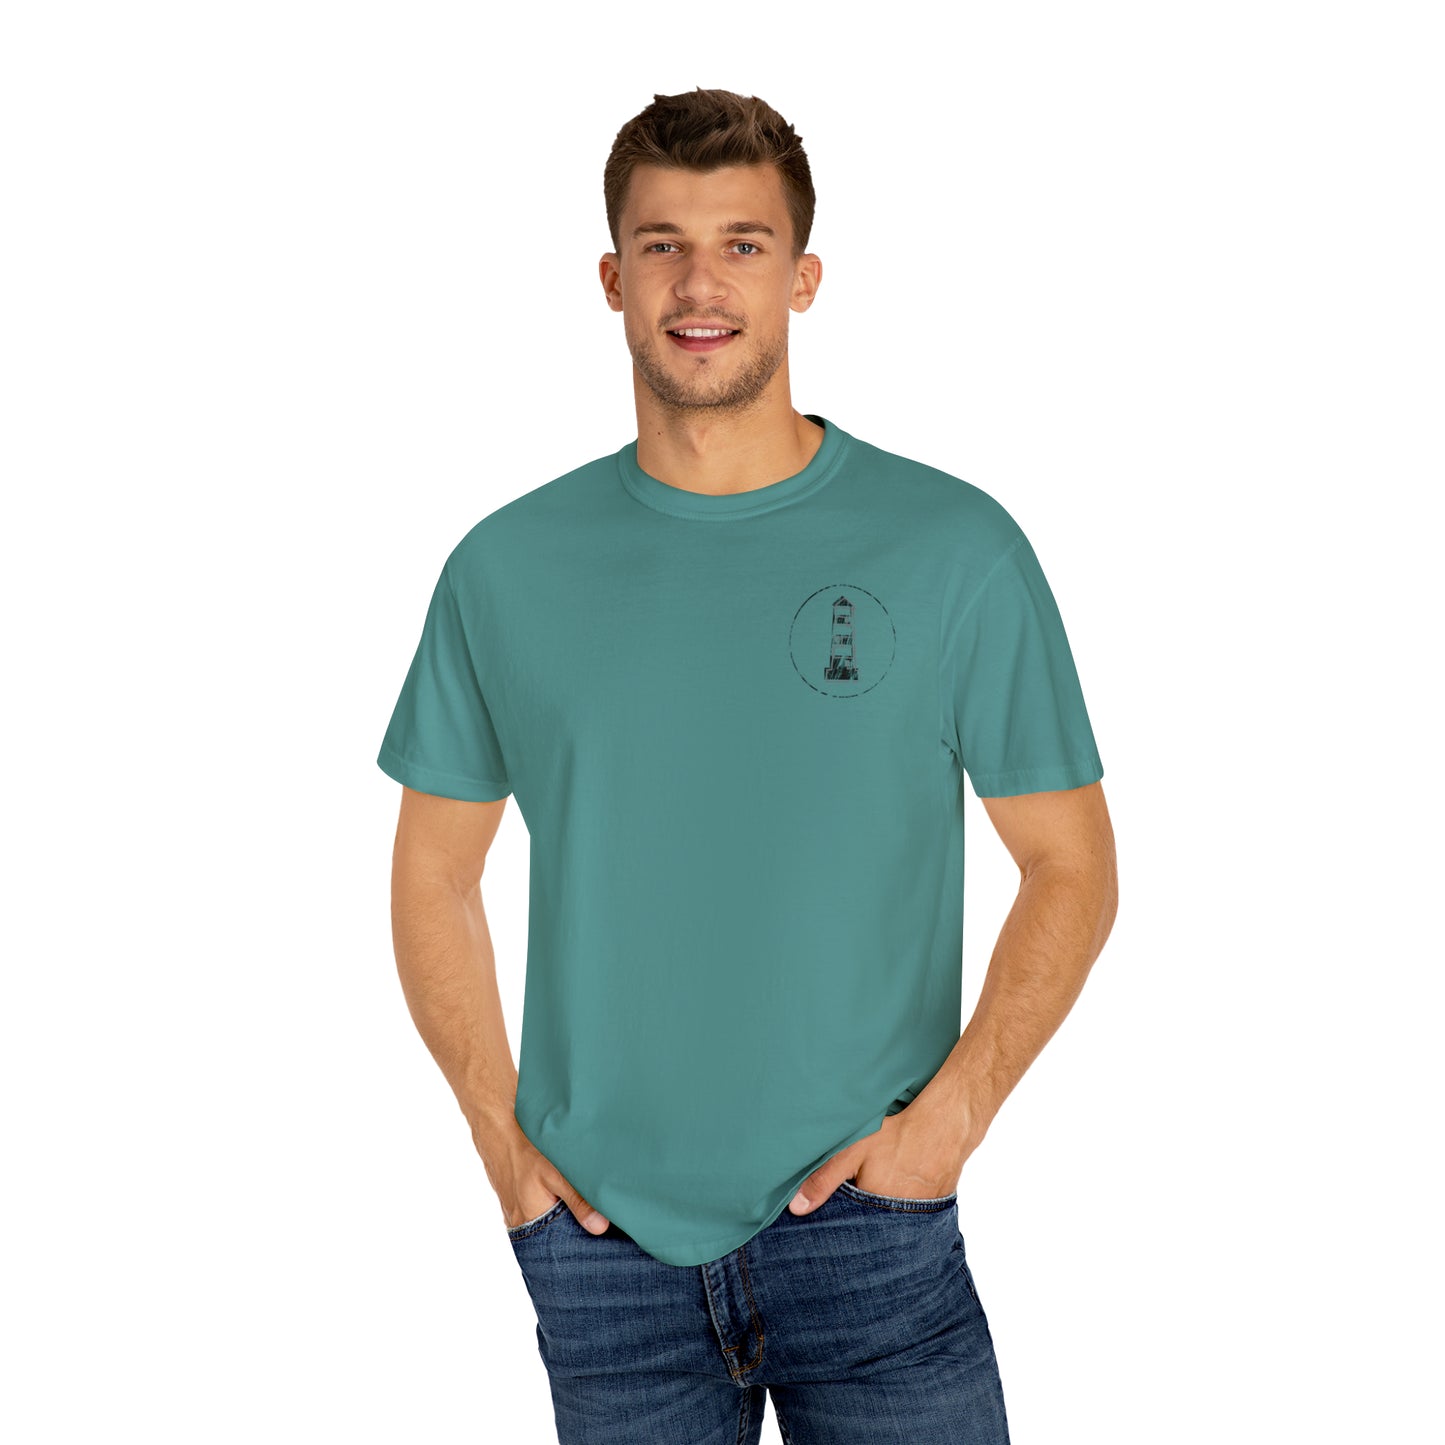 Outsider with Lighthouse Comfort Colors Unisex T-shirt